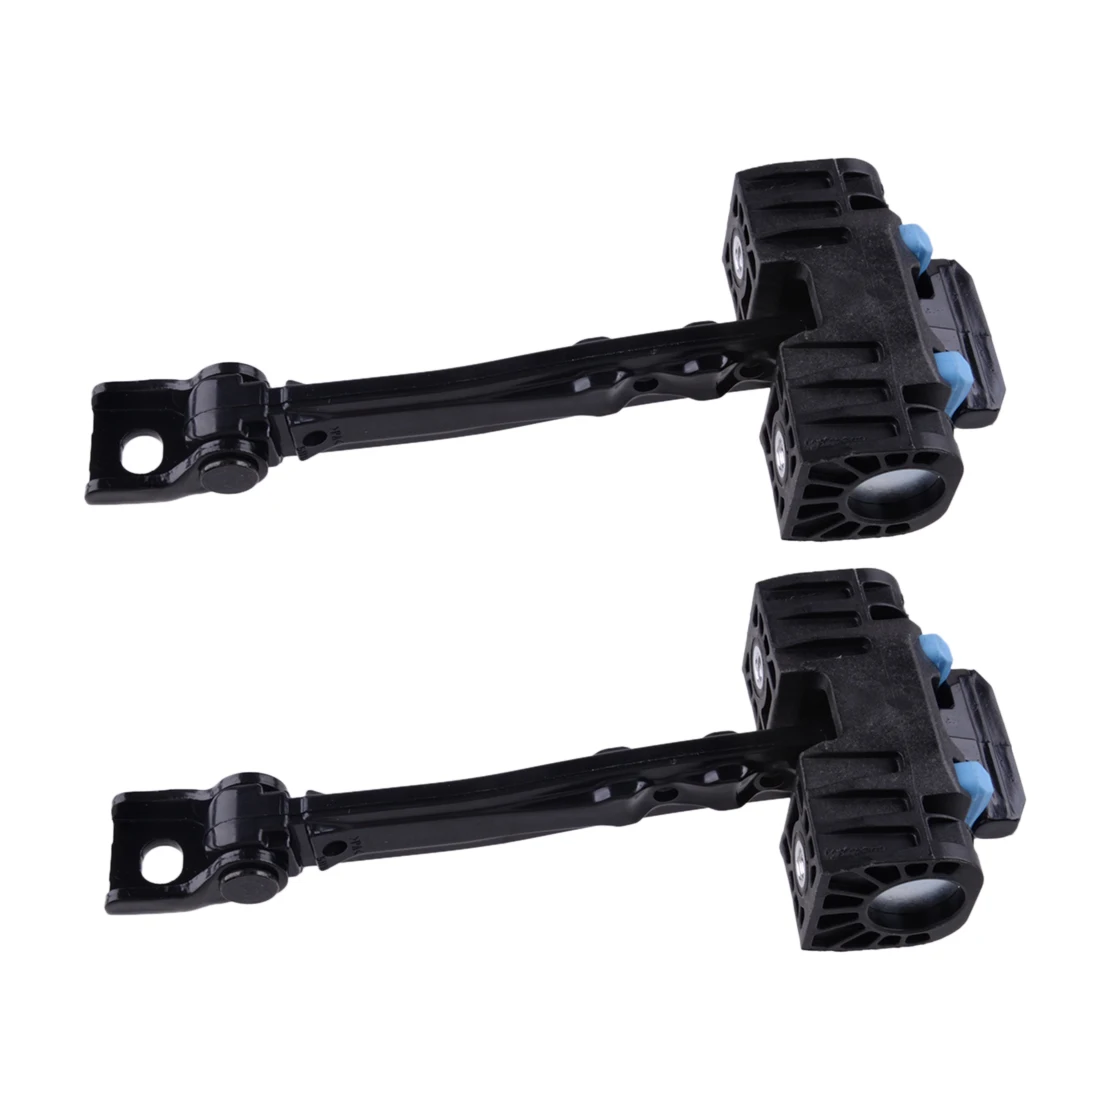 

2Pcs Front Door Brake Check Stopper Hinge Fit for Mini Cooper R50 R52 R53 R56 R57 R58 Clubman R55 Roadster R59 51217176811